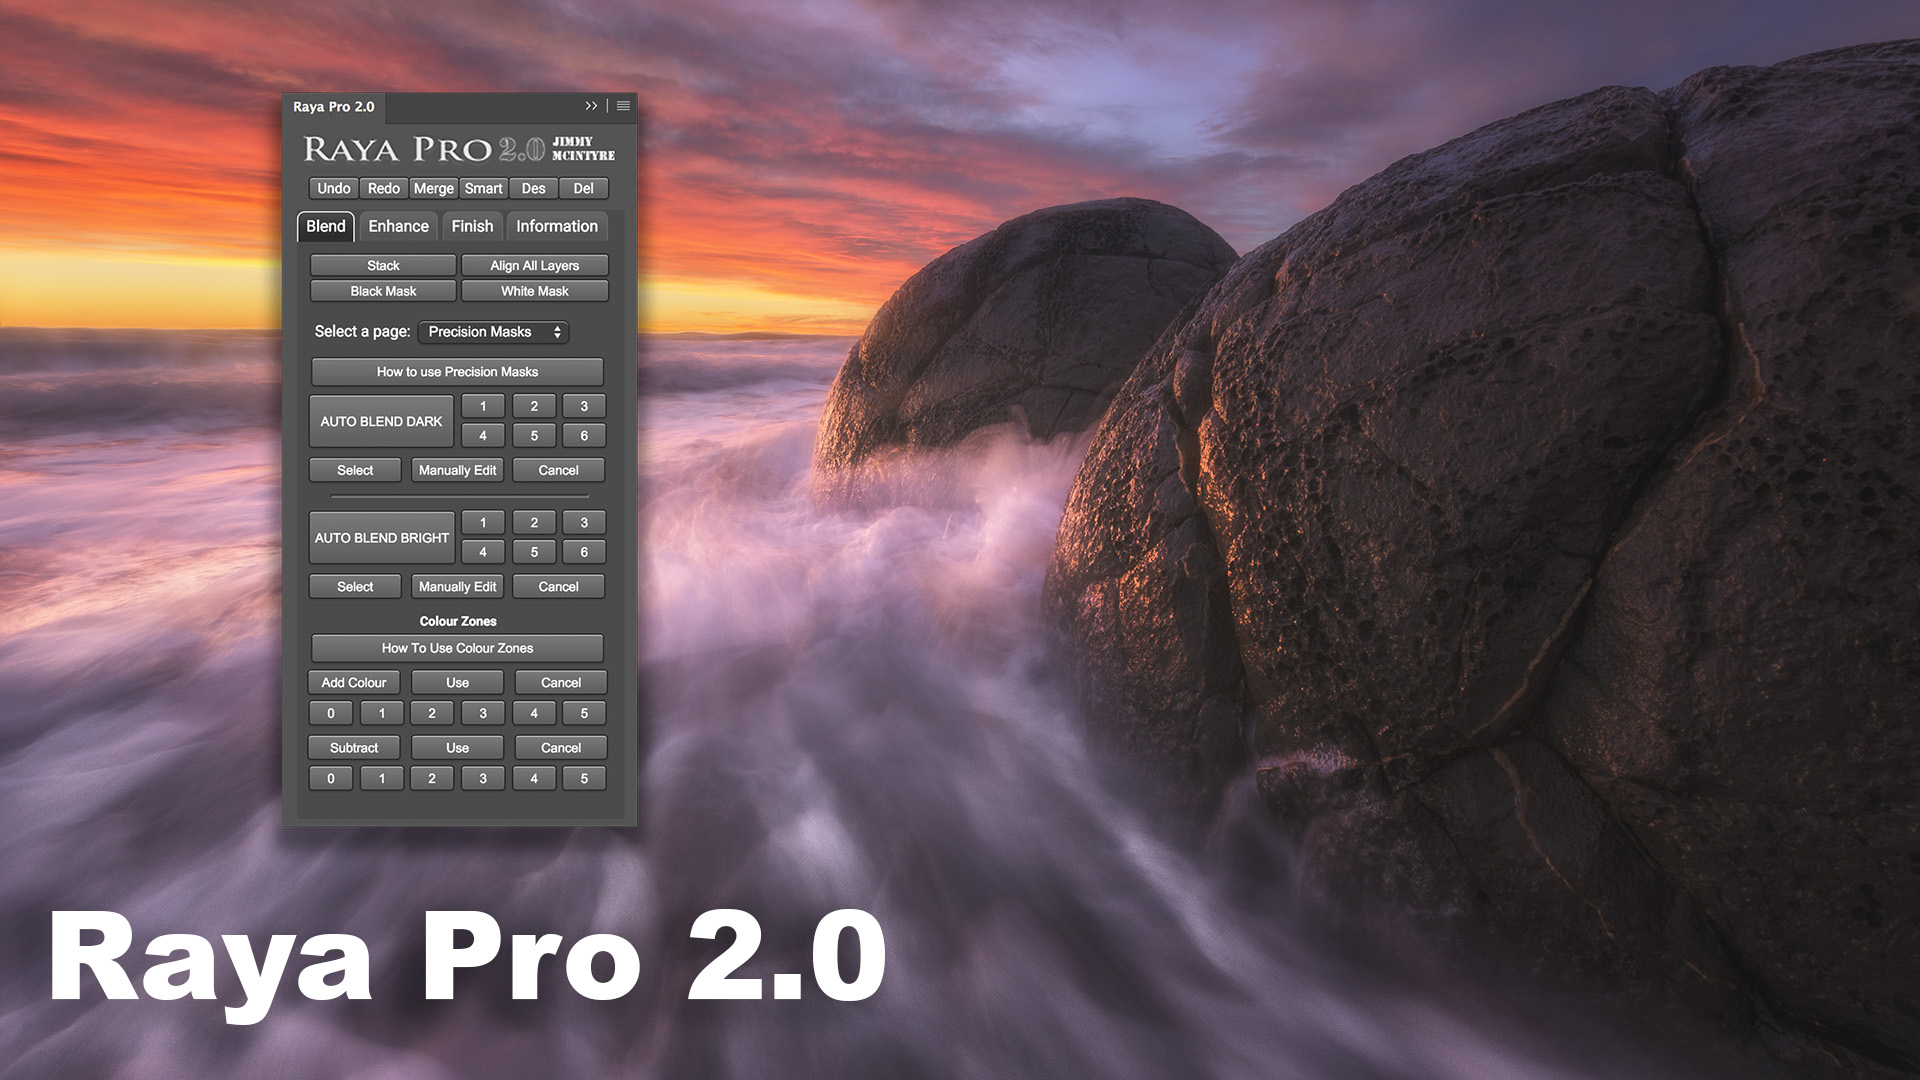 Preview Raya Pro 2.0 (New Exposure Blending Tools and more..) – Out on February 23rd